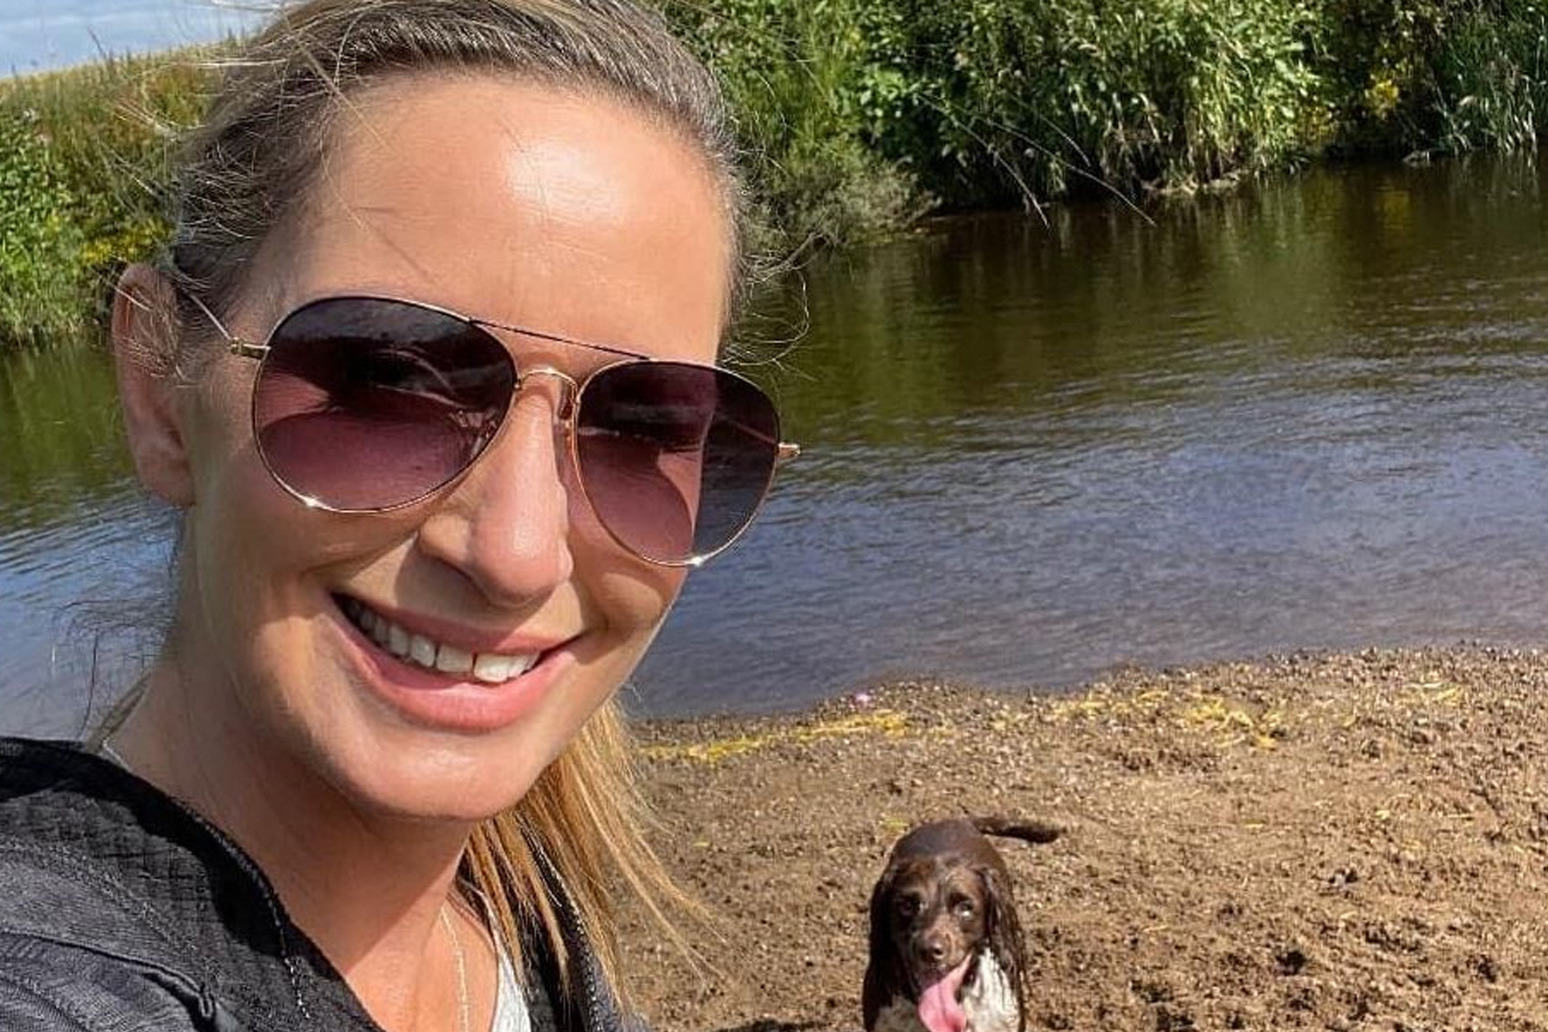 Police believe missing woman Nicola Bulley fell into river while walking her dog 